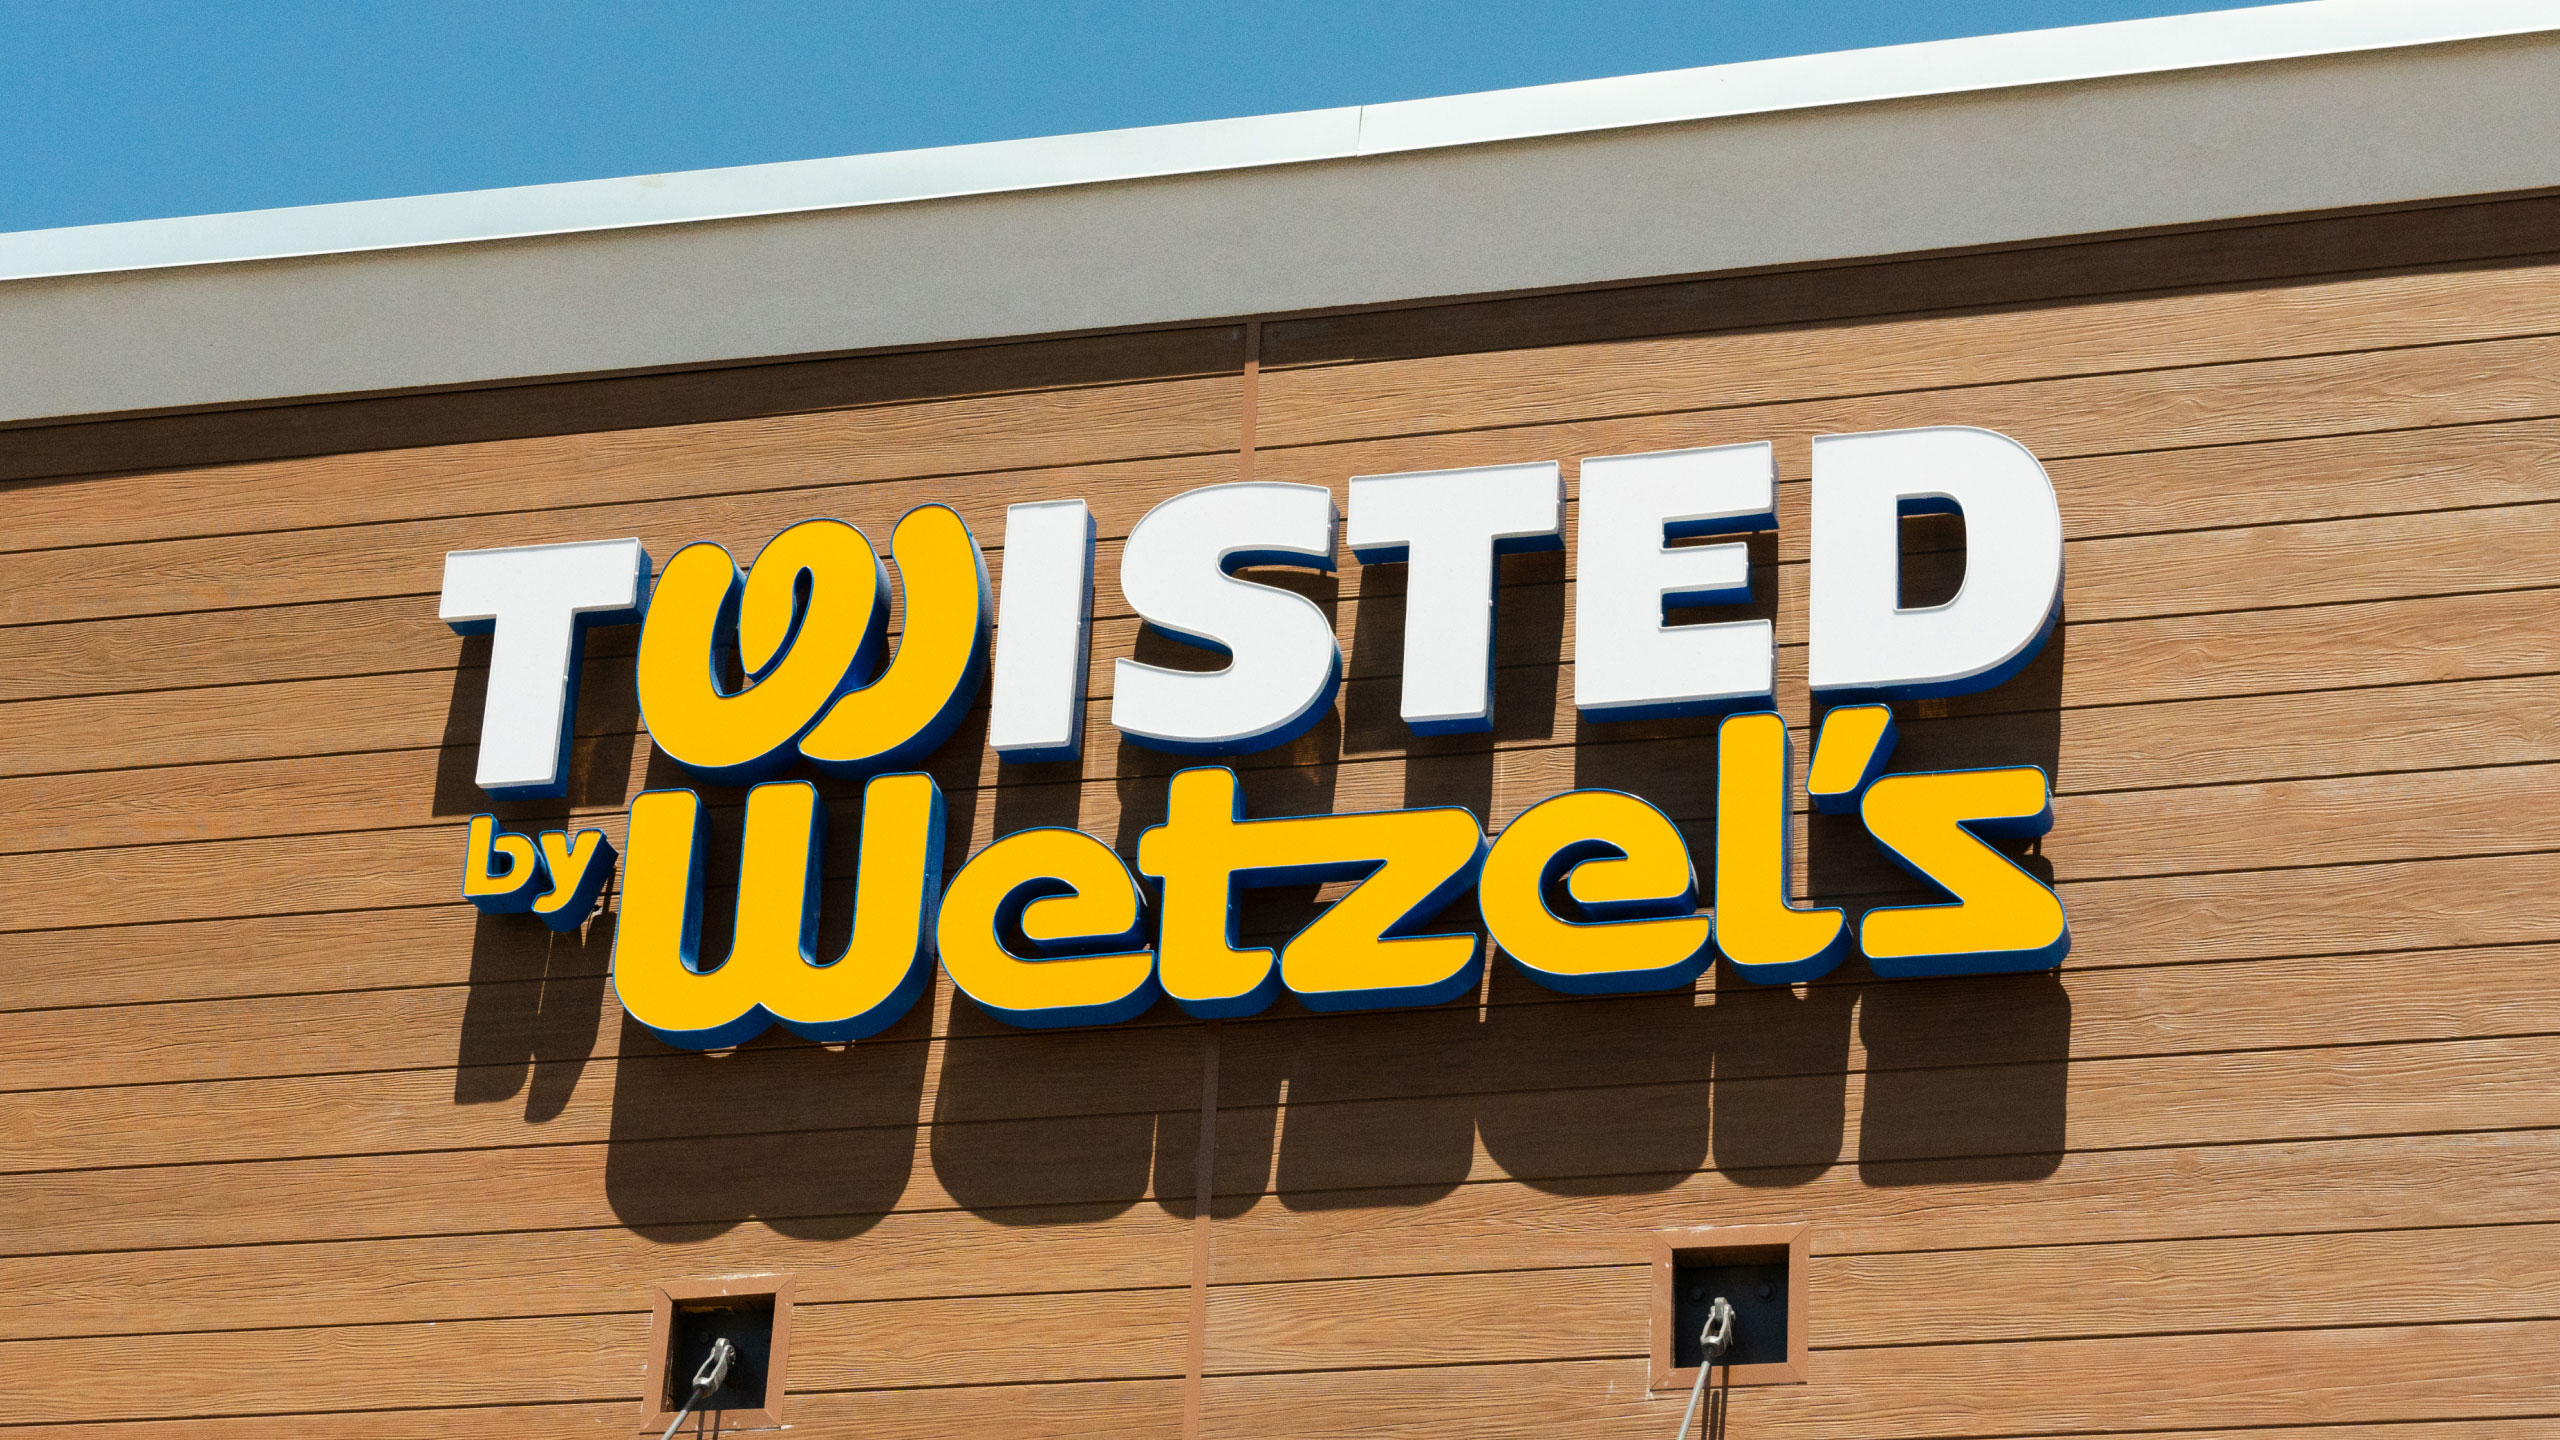 Twisted by Wetzel’s